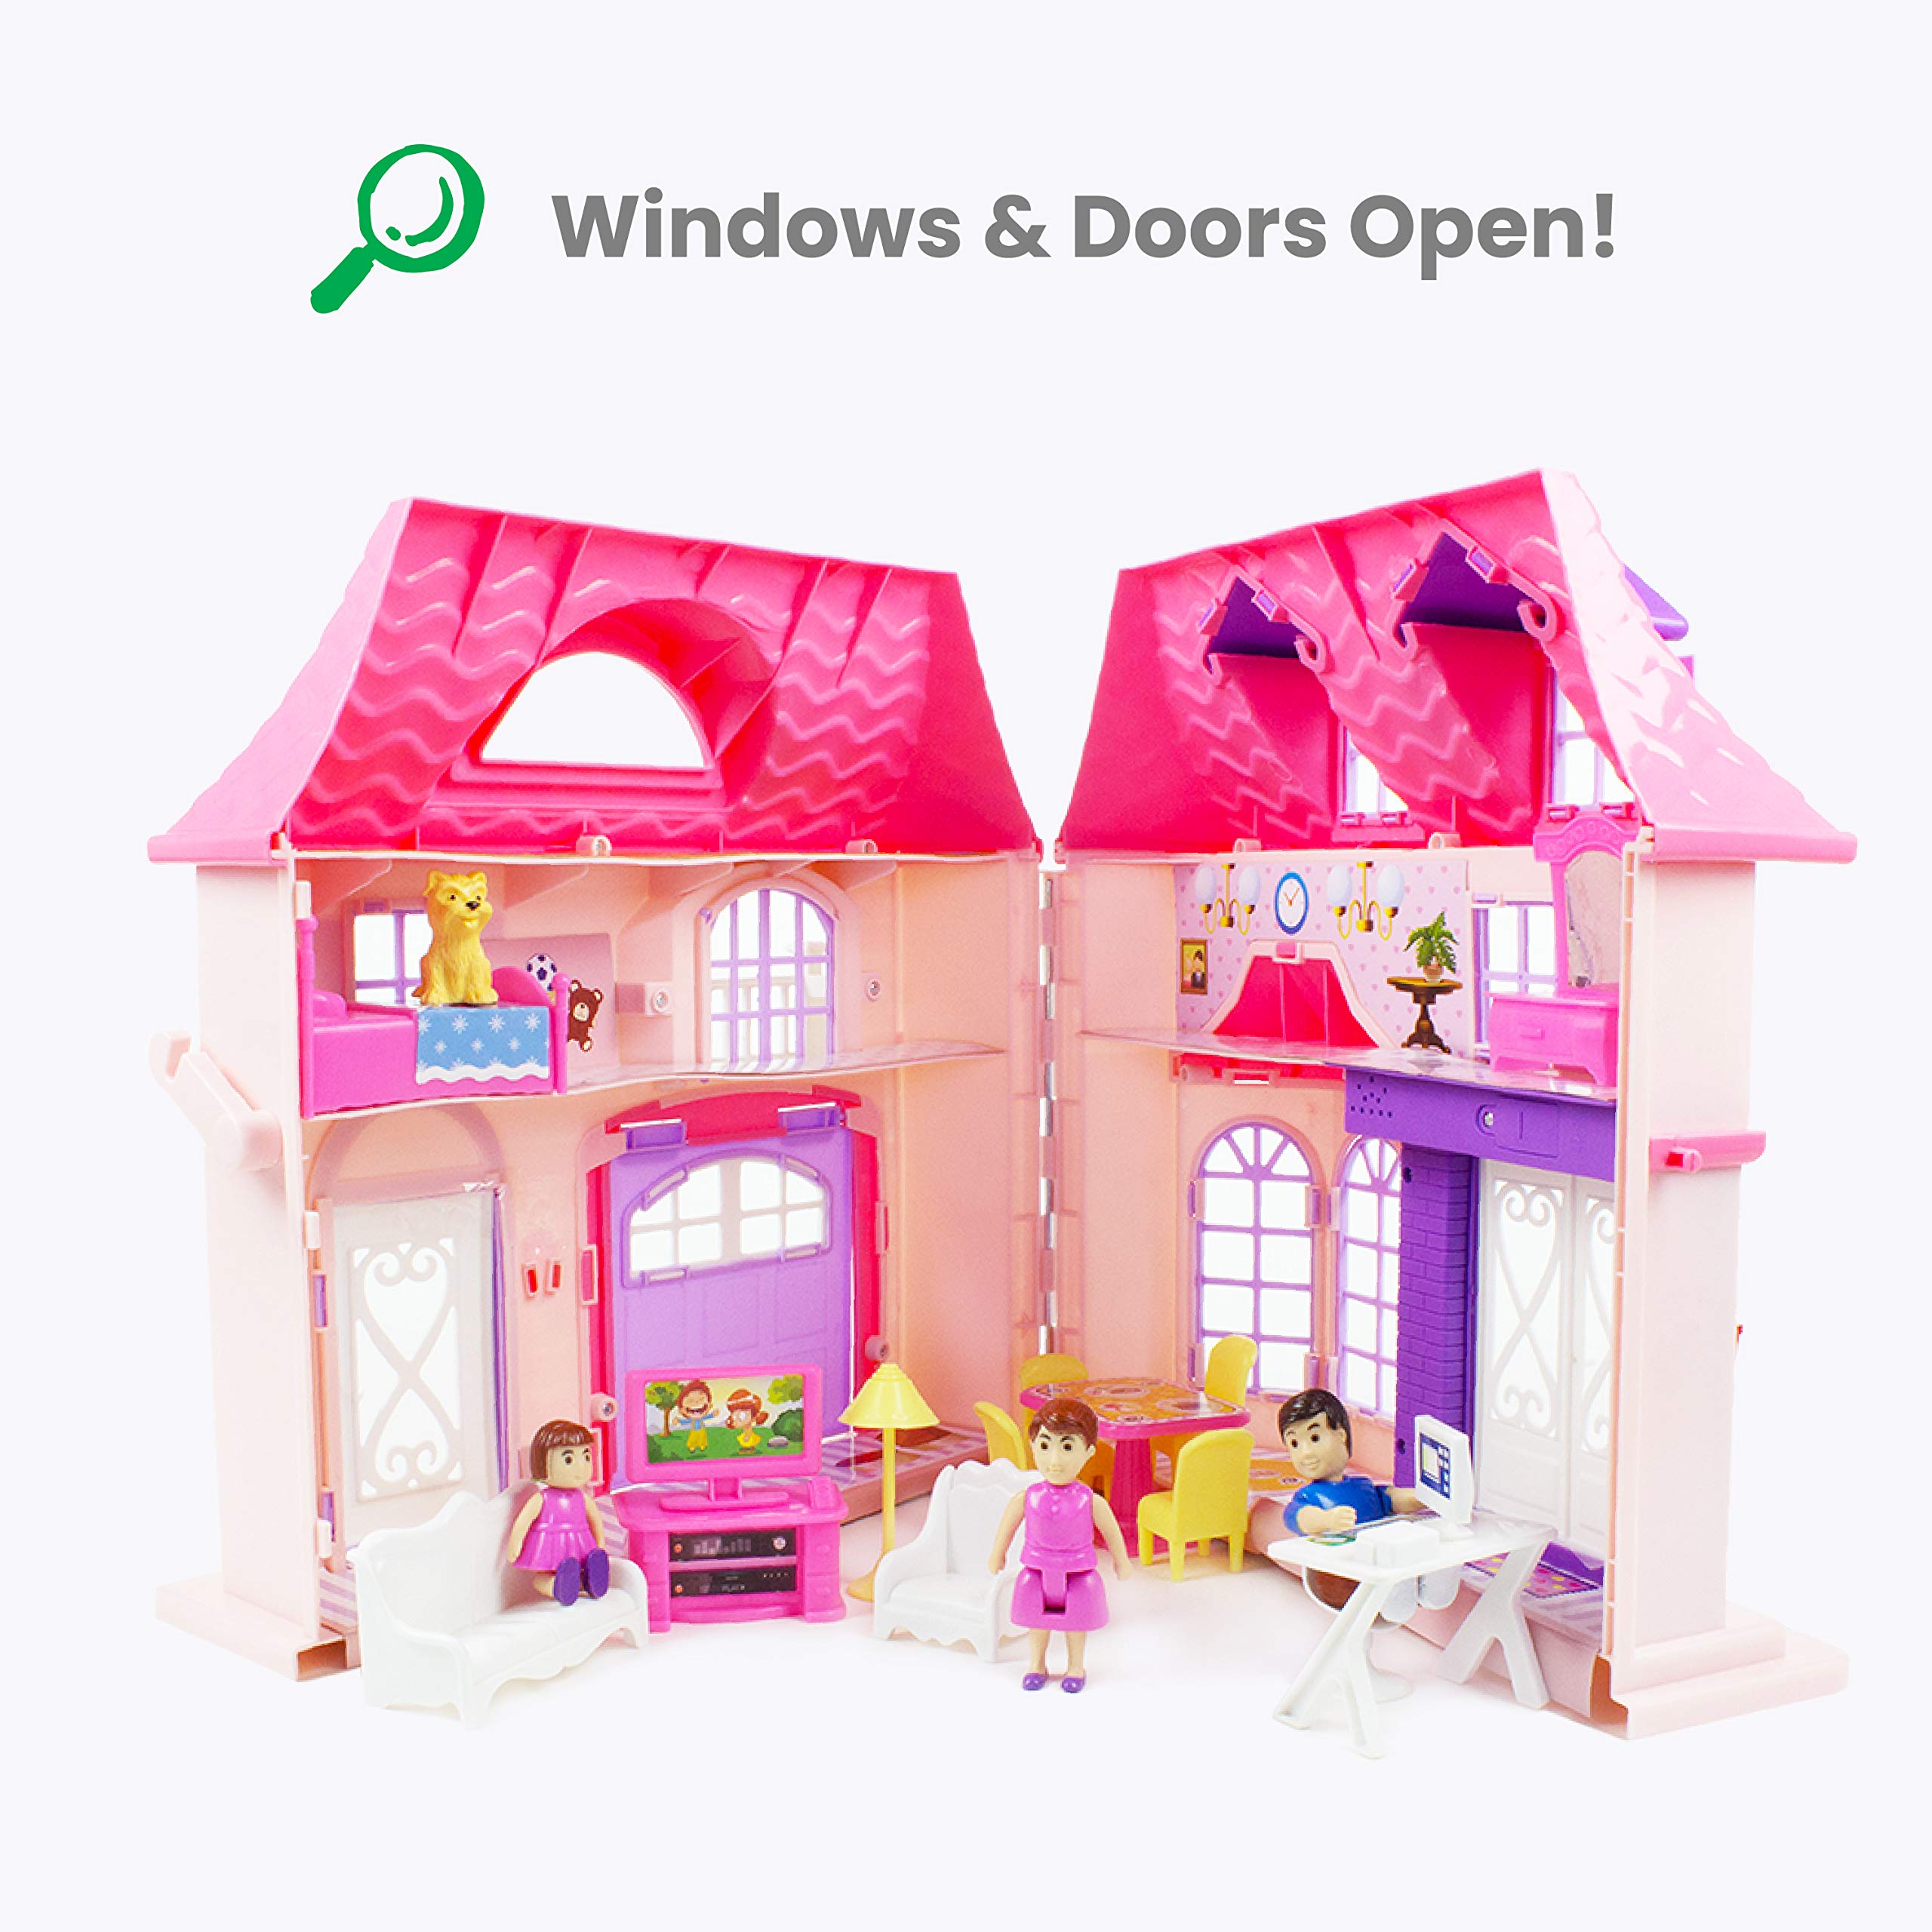 Boley American Doll House - 21 Pc Kids & Toddler Toy House Playset with Small Furniture & Dolls